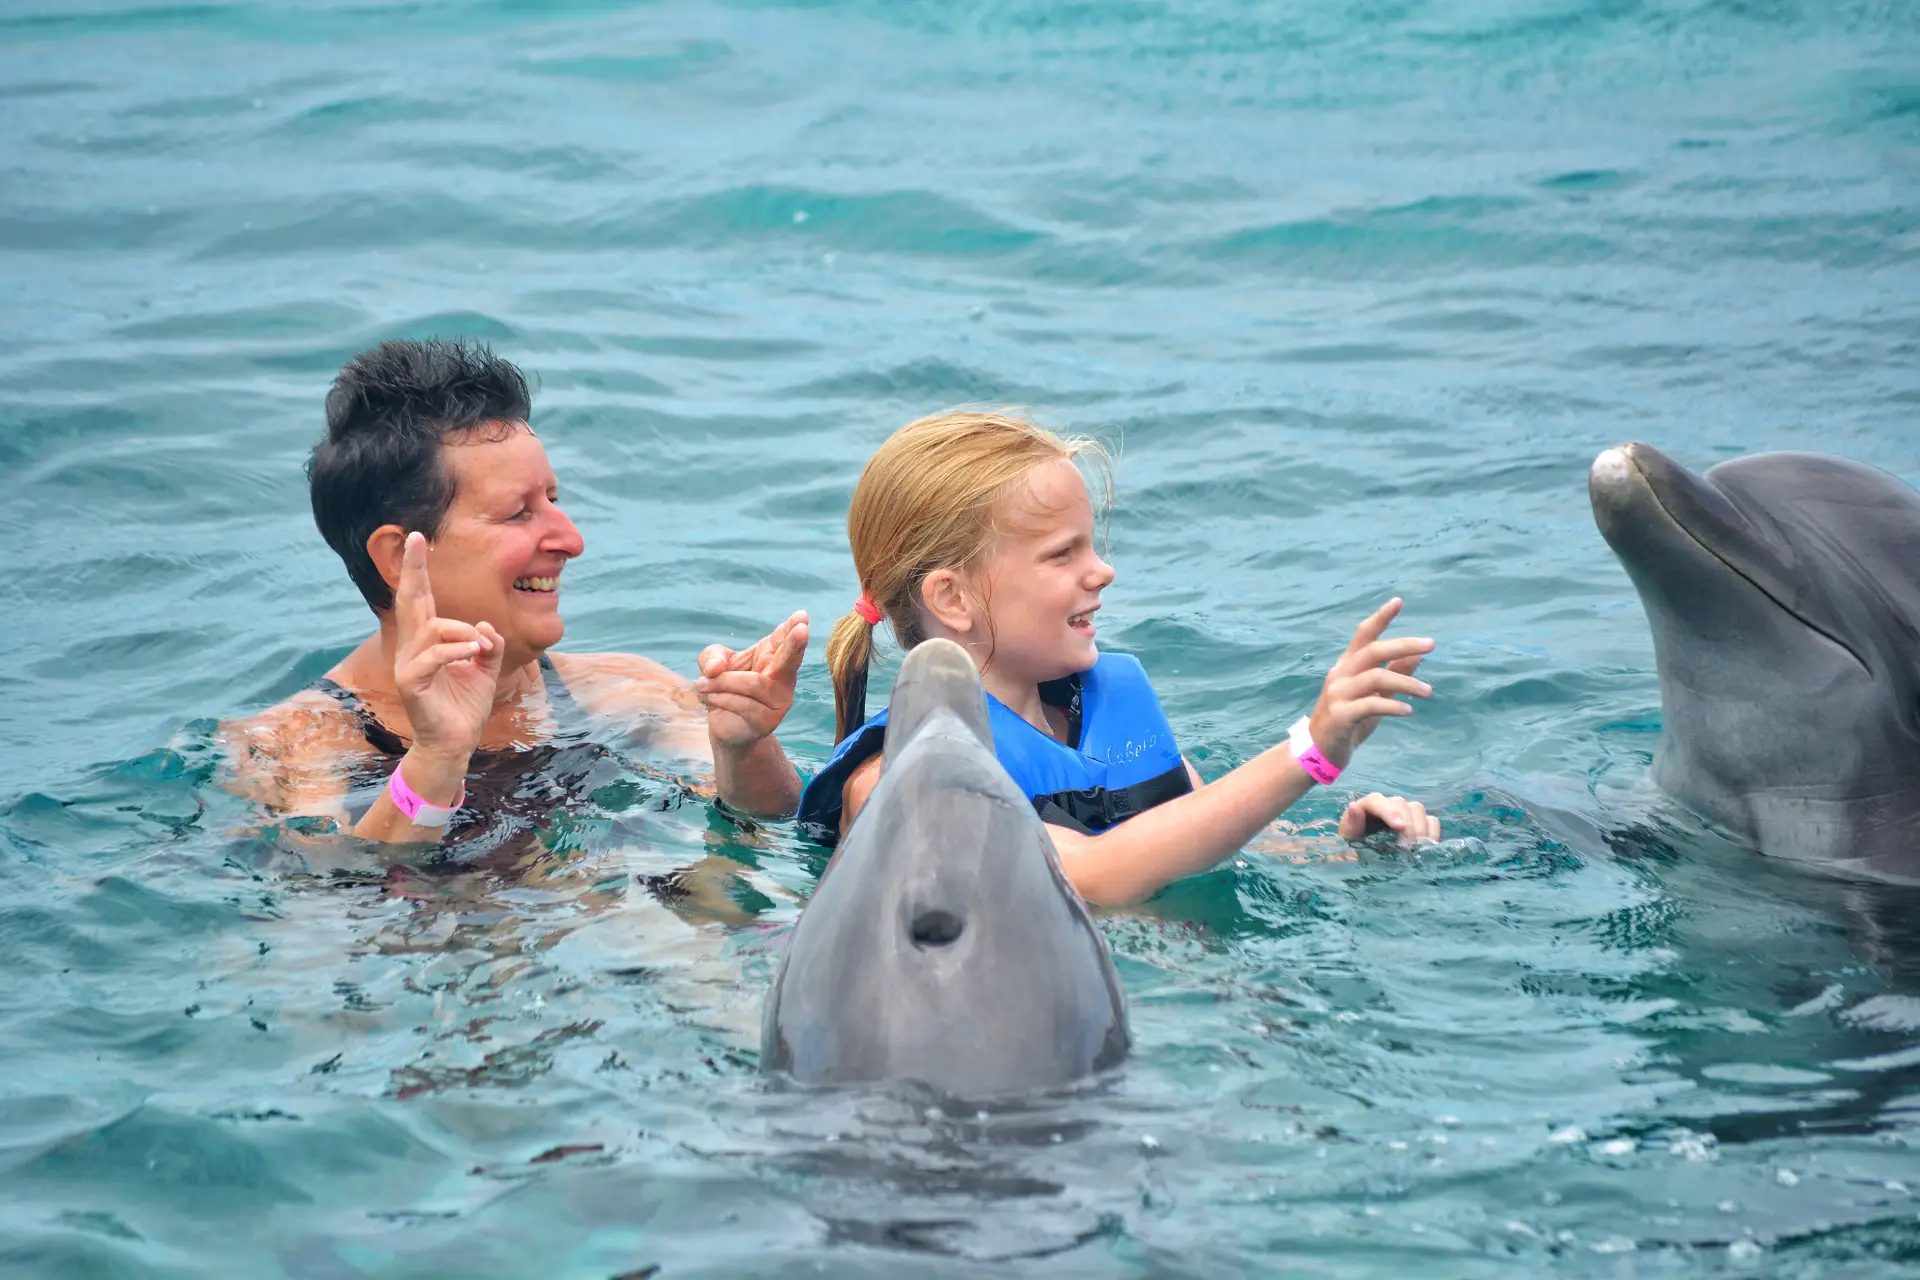 A man guides a young woman in interacting with dolphins.